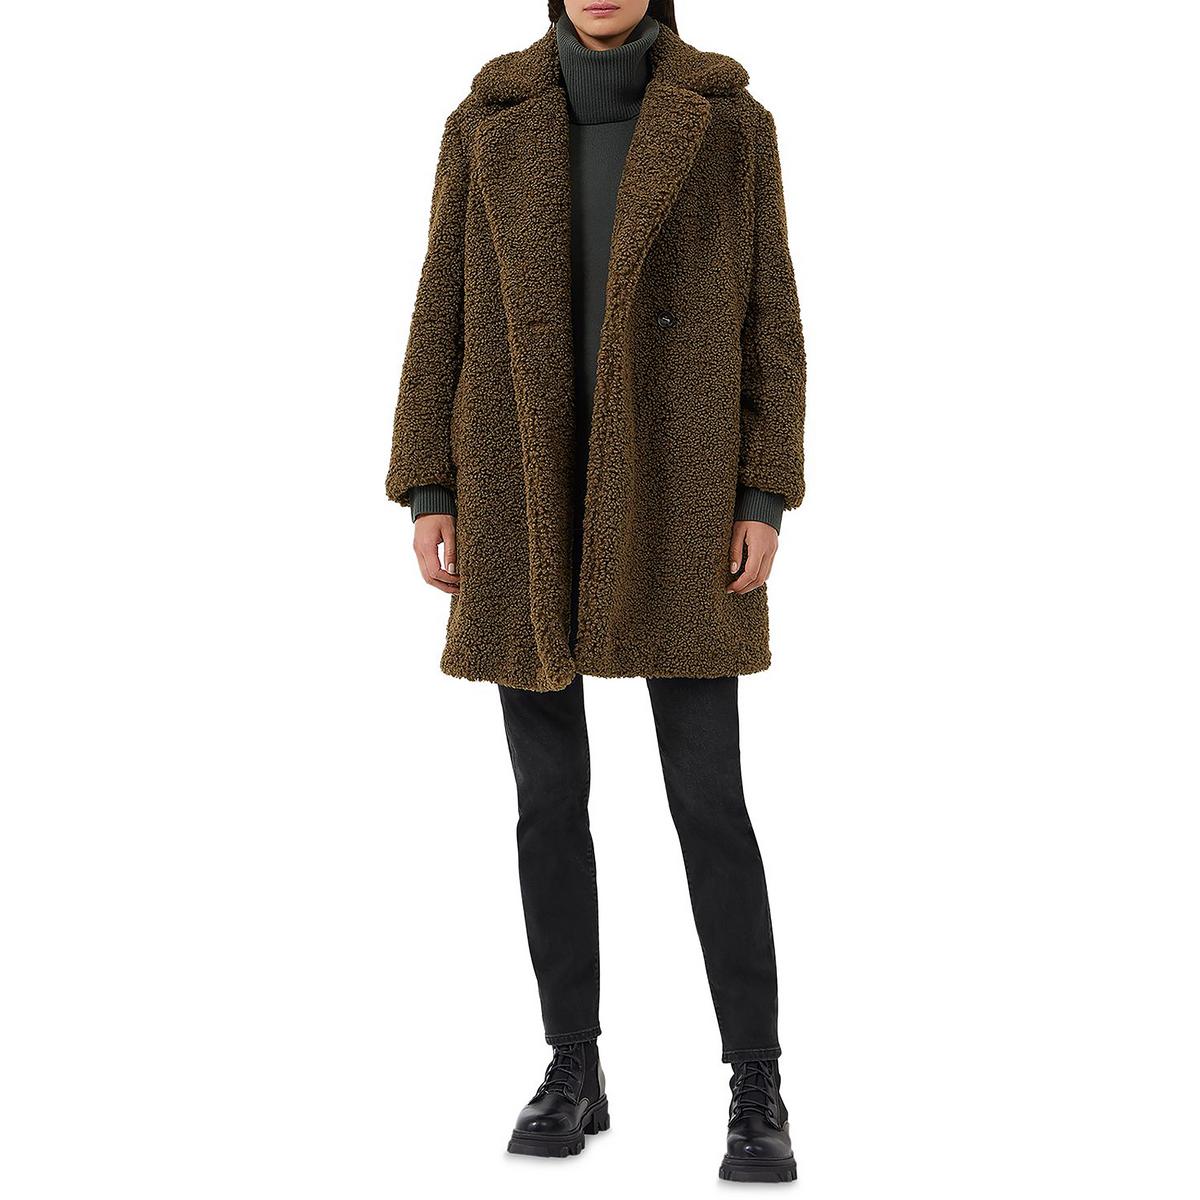 French Connection Callie Iren Borg Womens Mid-Length Oversize Faux Fur Coat